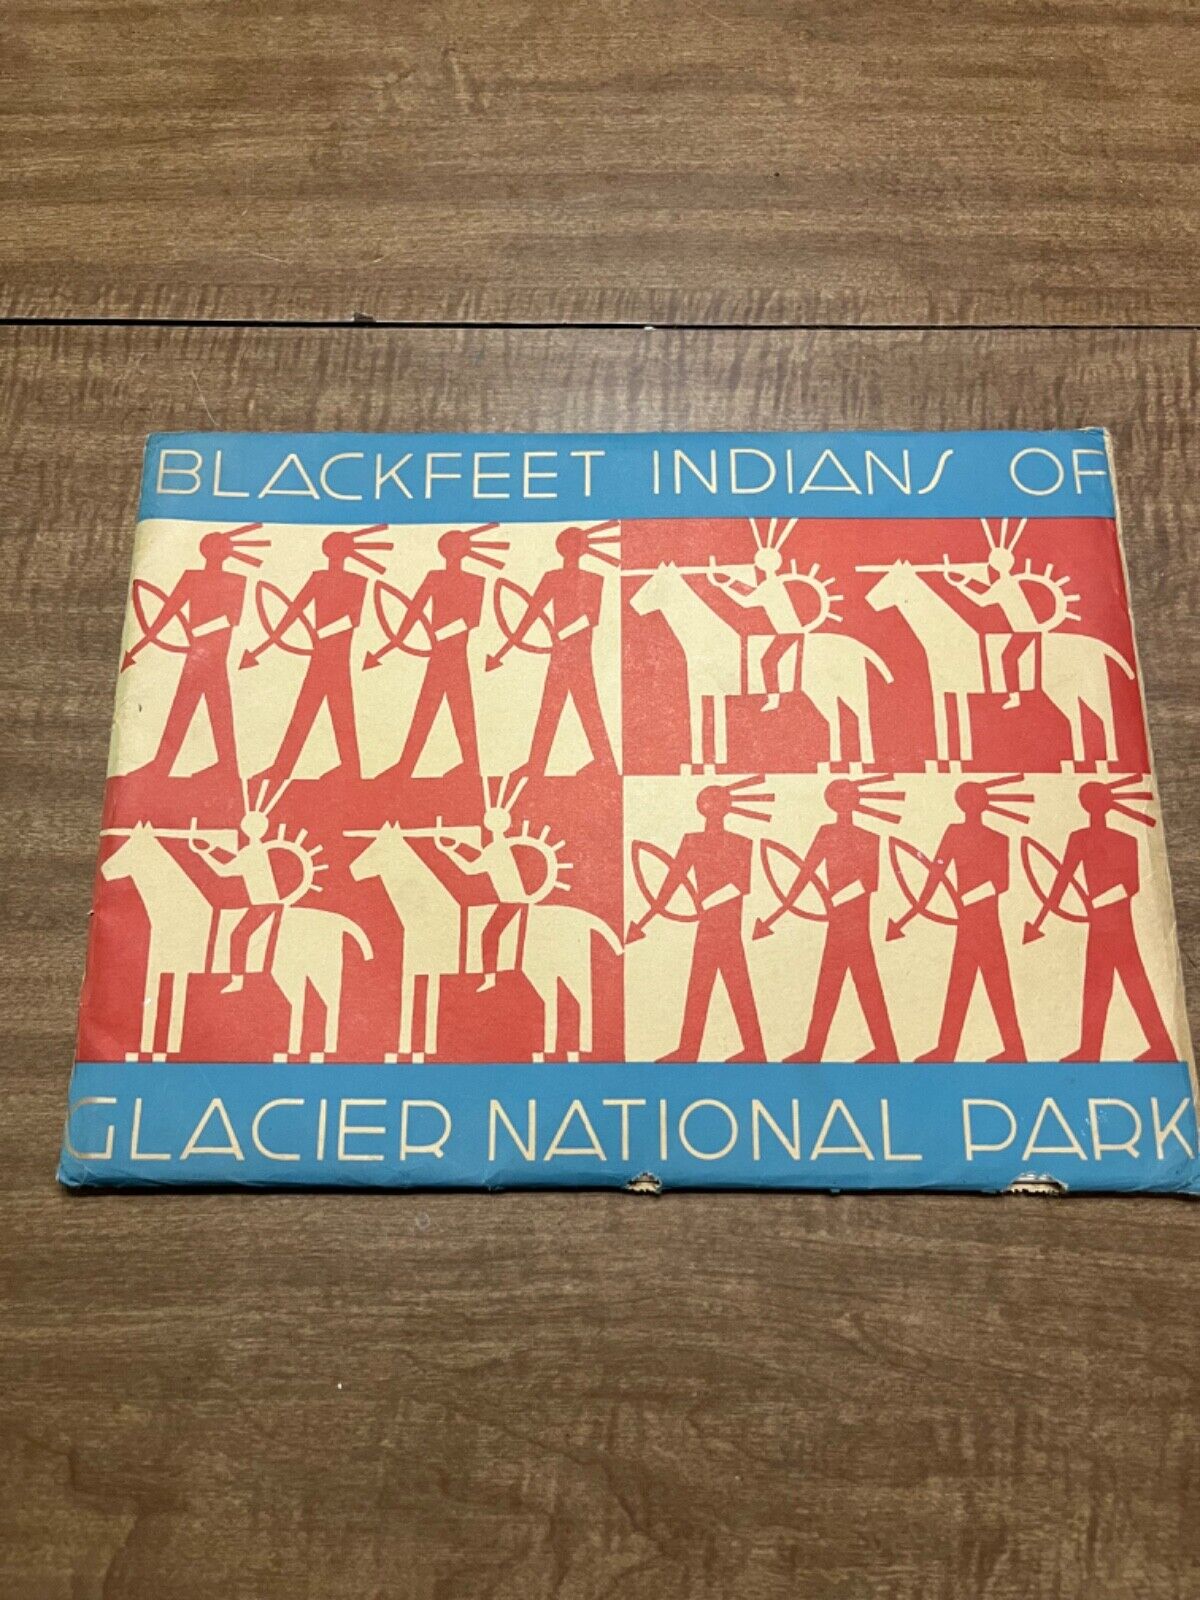 Blackfeet Indians Of Glacier National Park 1940 24 pictures and booklet